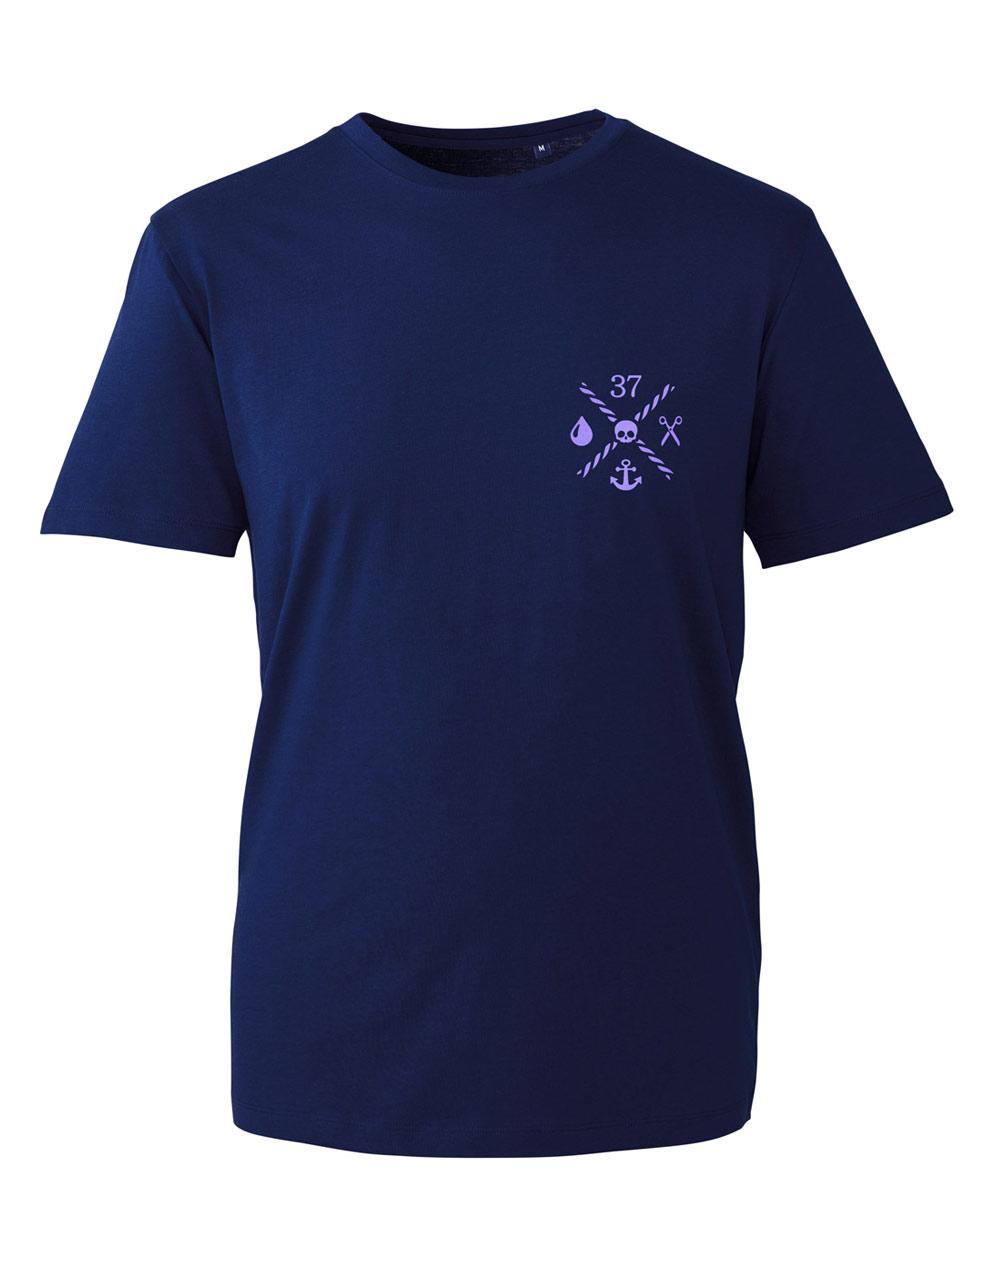 Classic unisex T-shirt in navy blue with lilac logo on the chest